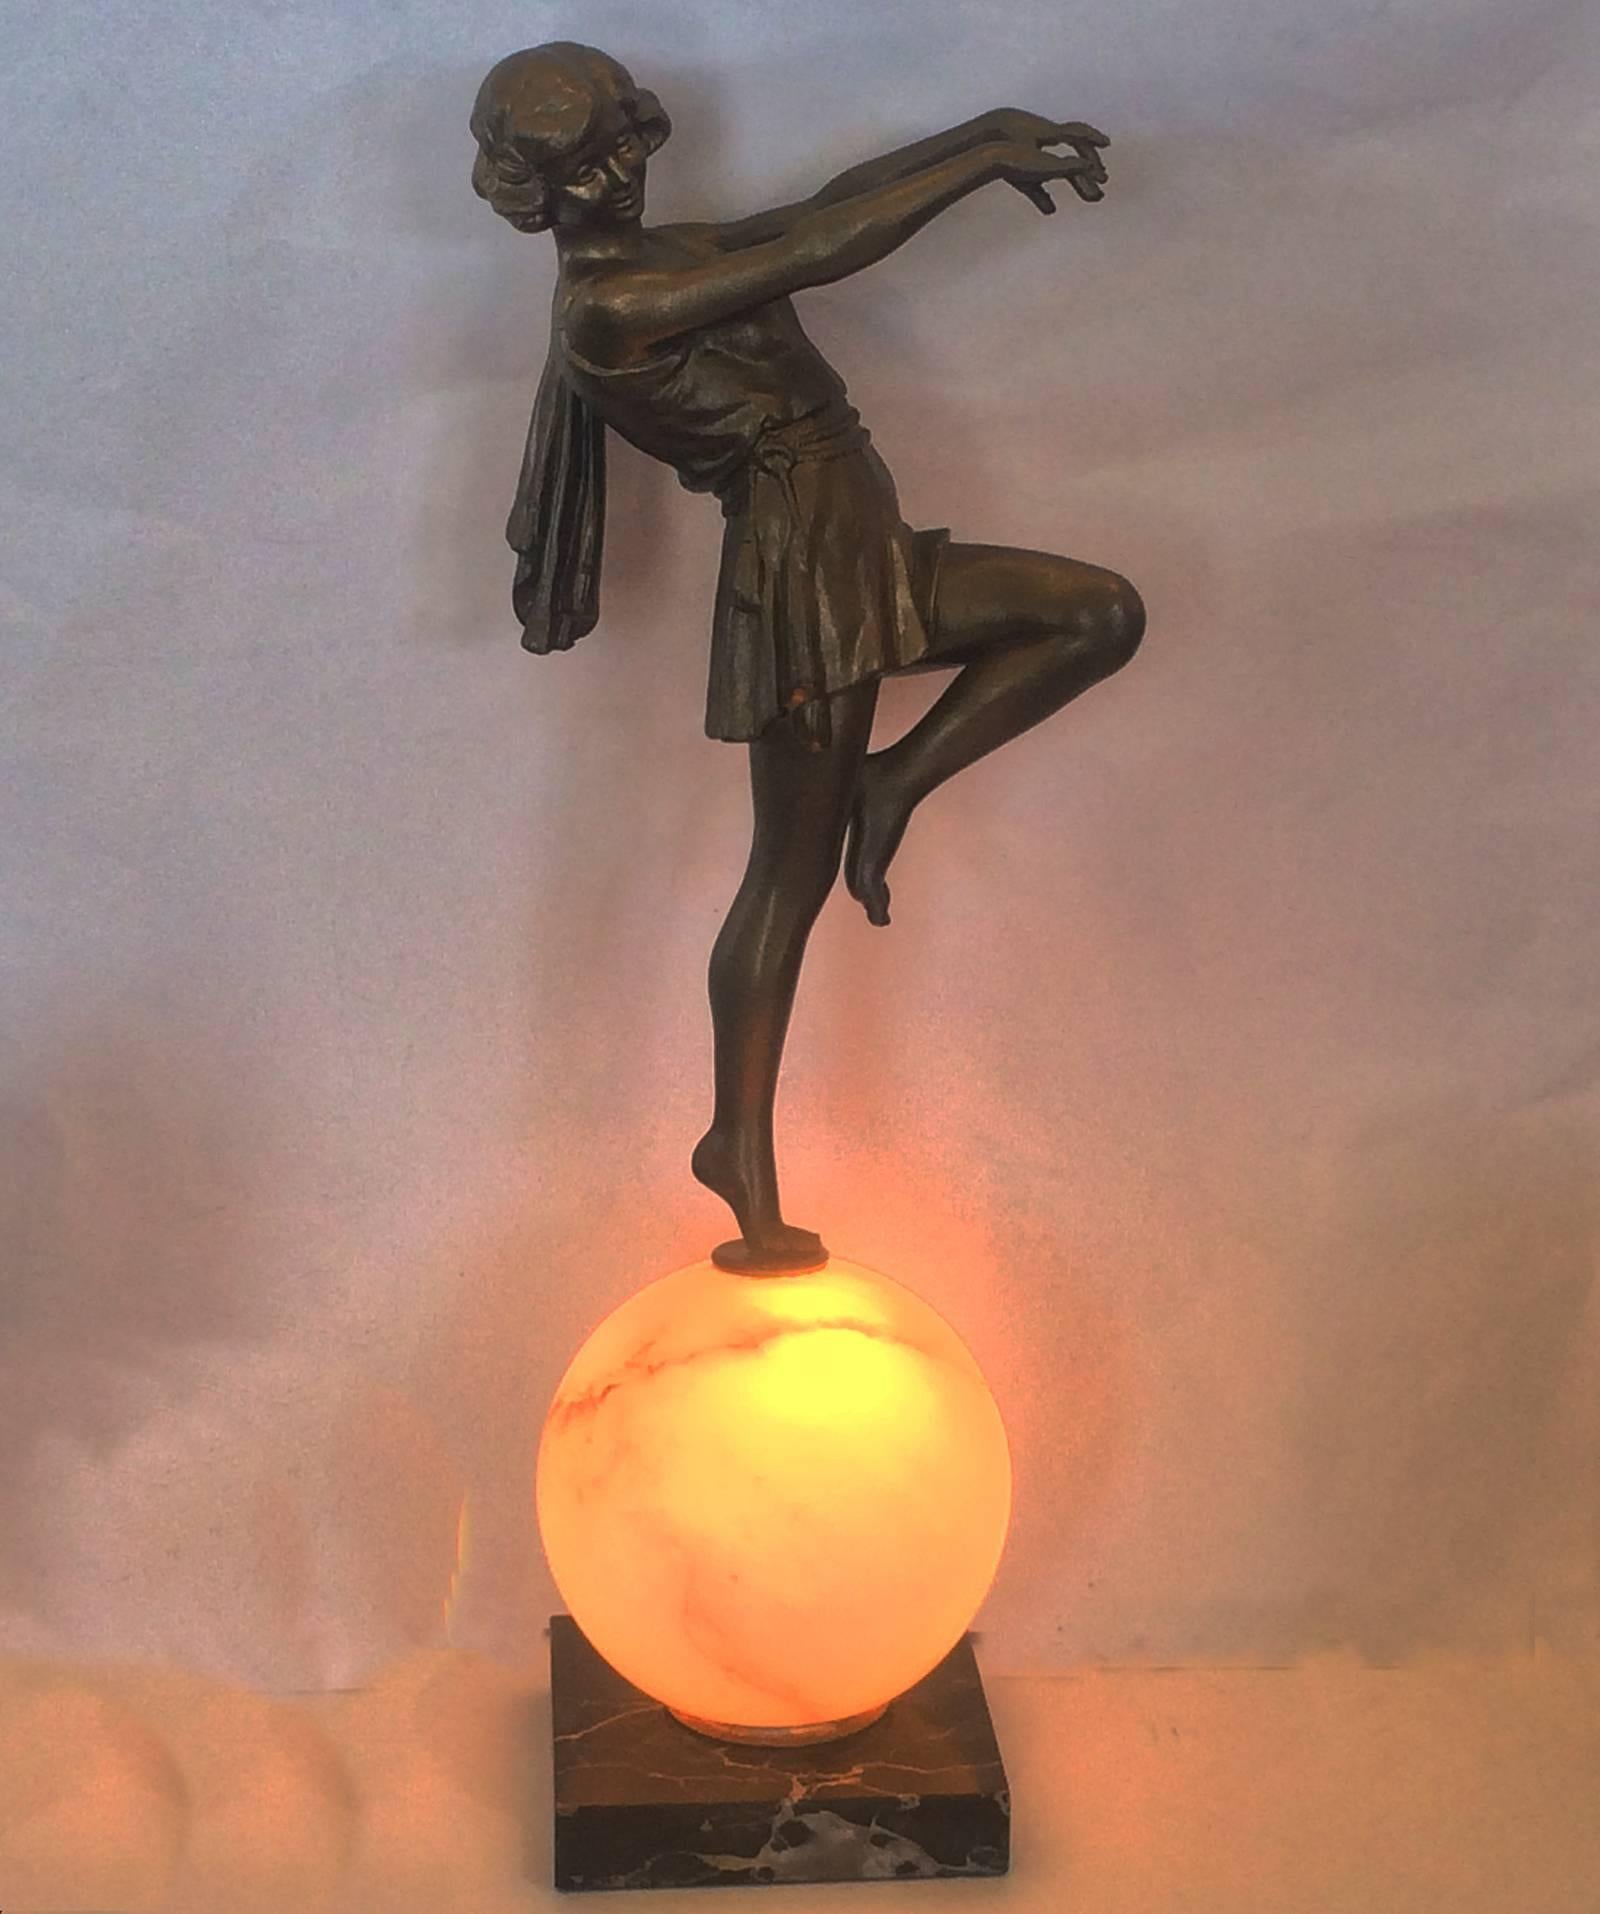 Rare Art Deco lamp with dancer on illuminated alabaster sphere. Amazing design, finely detailed and in exceptional condition. White Alabaster finely veined with black and grey, and Italian Portorro Mable, black with white and “gold” veins. Re-wired